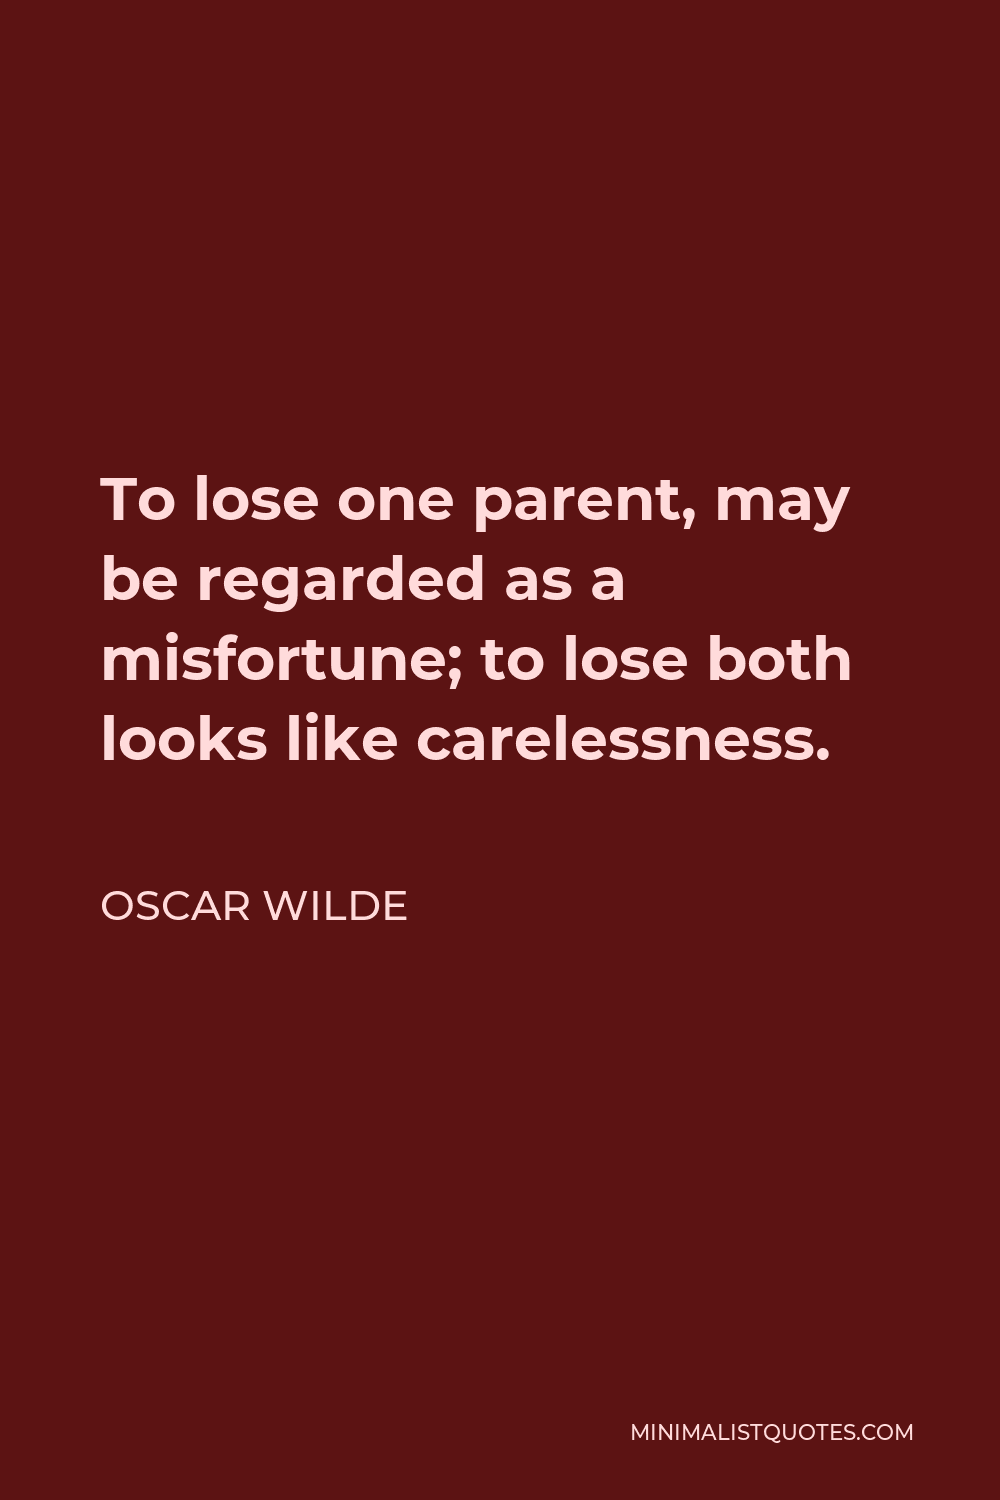 Oscar Wilde Quote - To lose one parent, may be regarded as a misfortune; to lose both looks like carelessness.